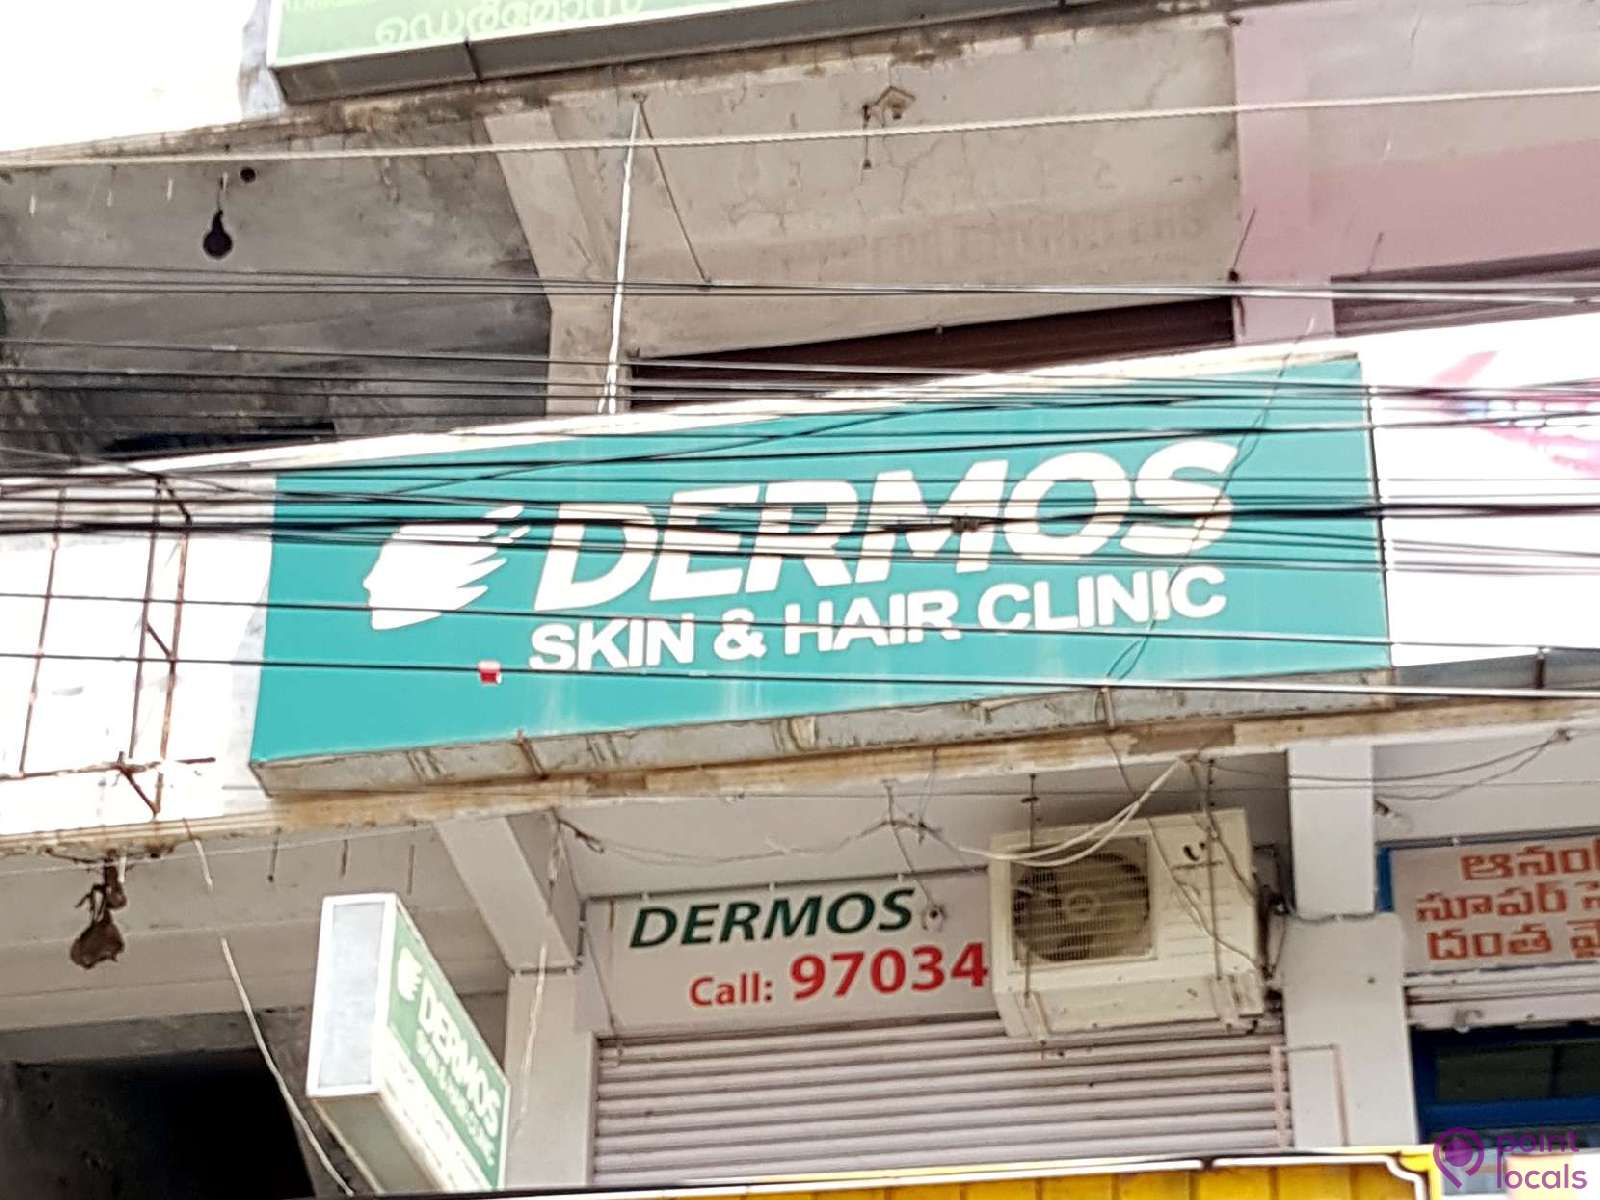 Dermos Skin & Hair Clinic - Skin Care Clinic in Secunderabad,Telangana |  Pointlocals